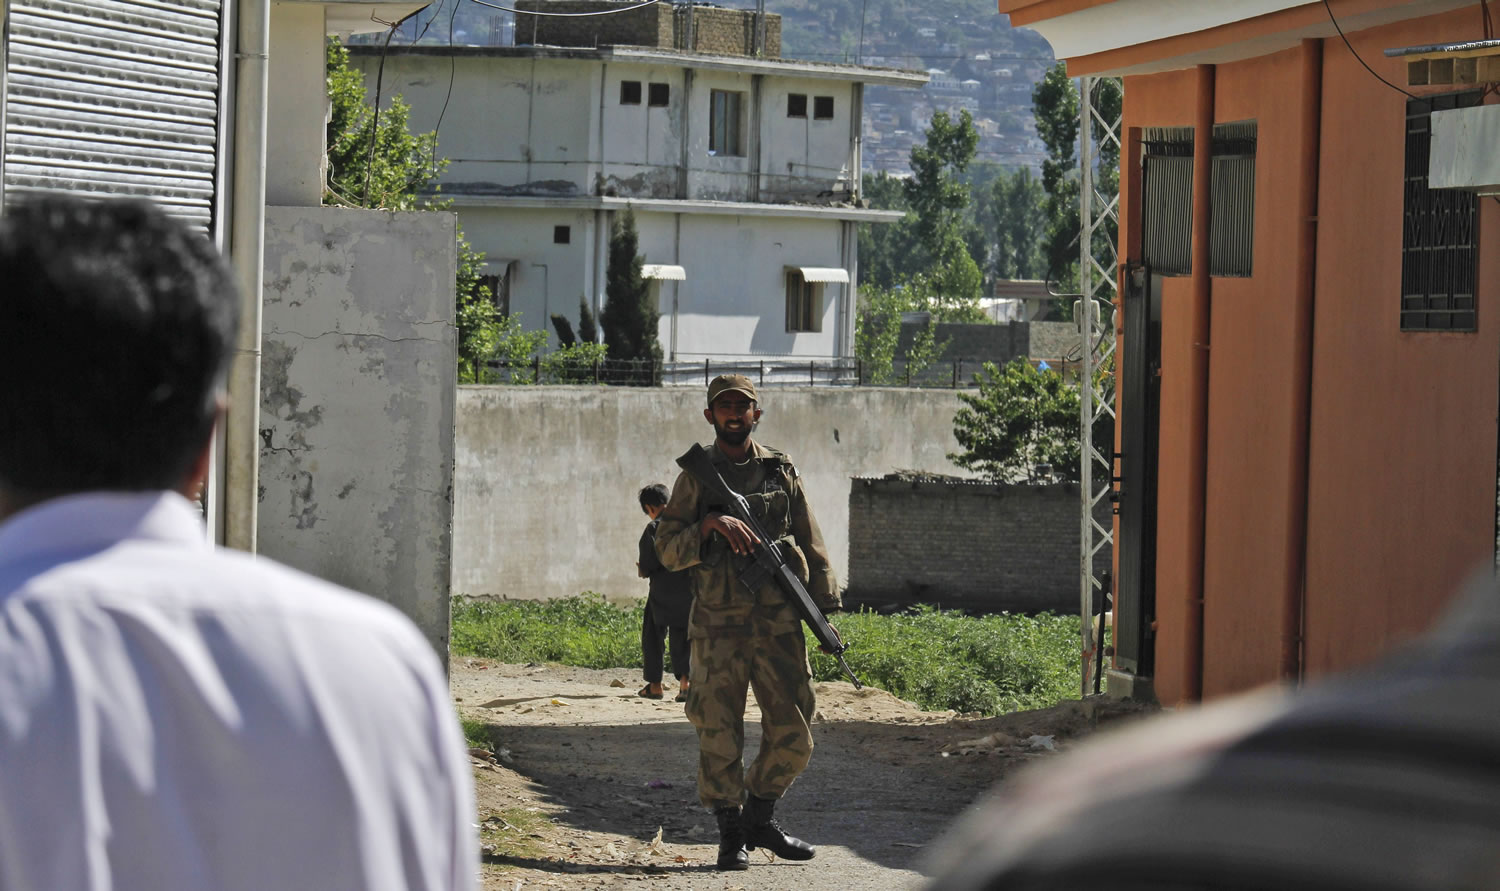 A Pakistan army soldier secures a street Sunday near the house in Abbottabad, Pakistan, where former al-Qaida leader Osama bin Laden was killed May 1.